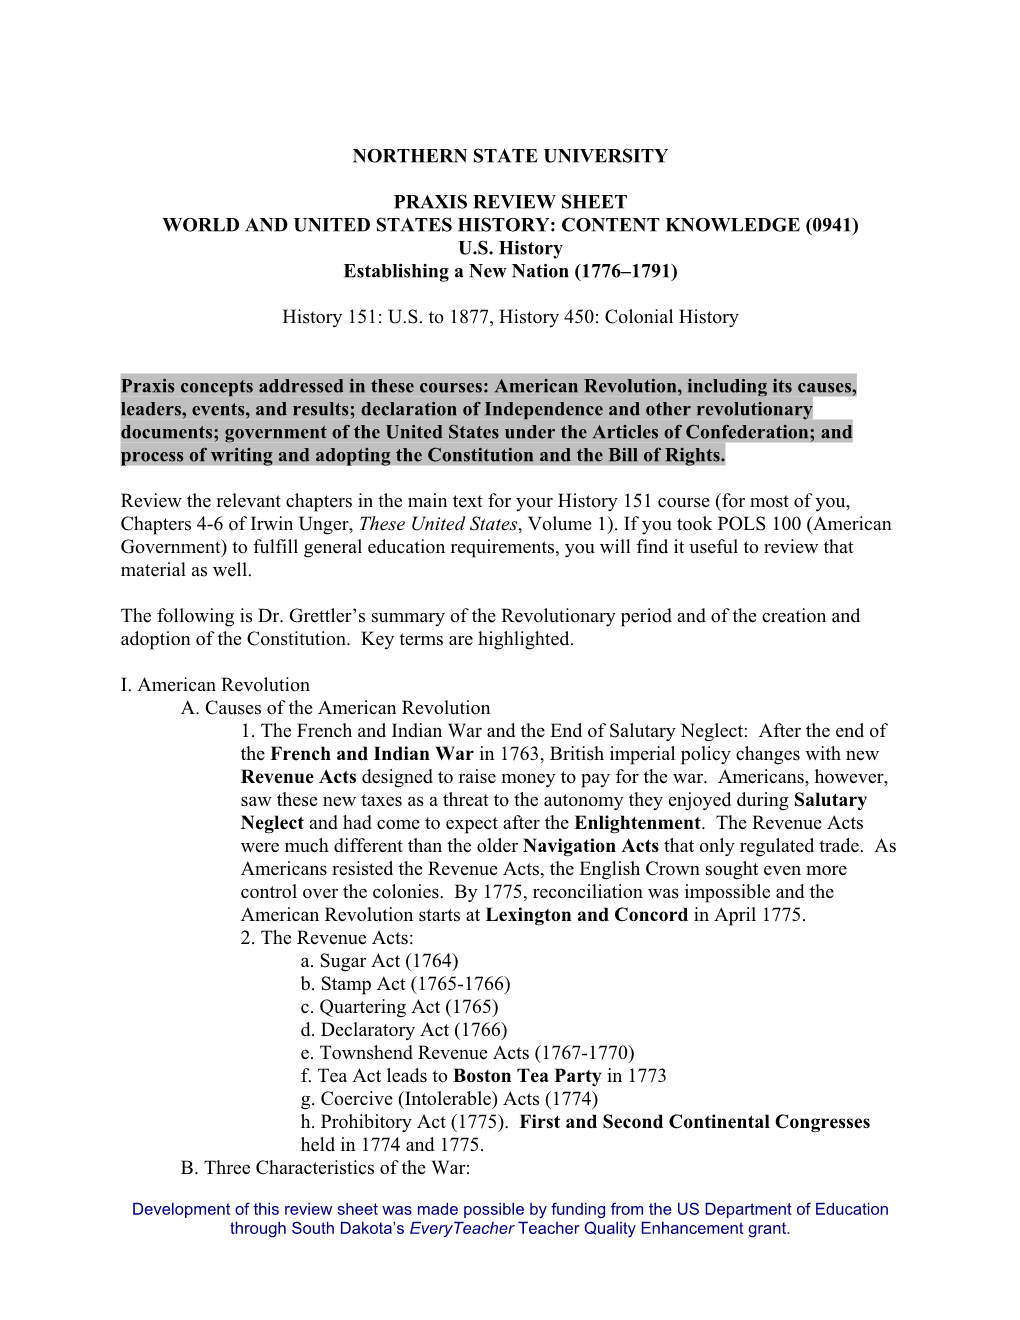 Praxis Review Sheet World and United States History: Content Knowledge (0941) U.S